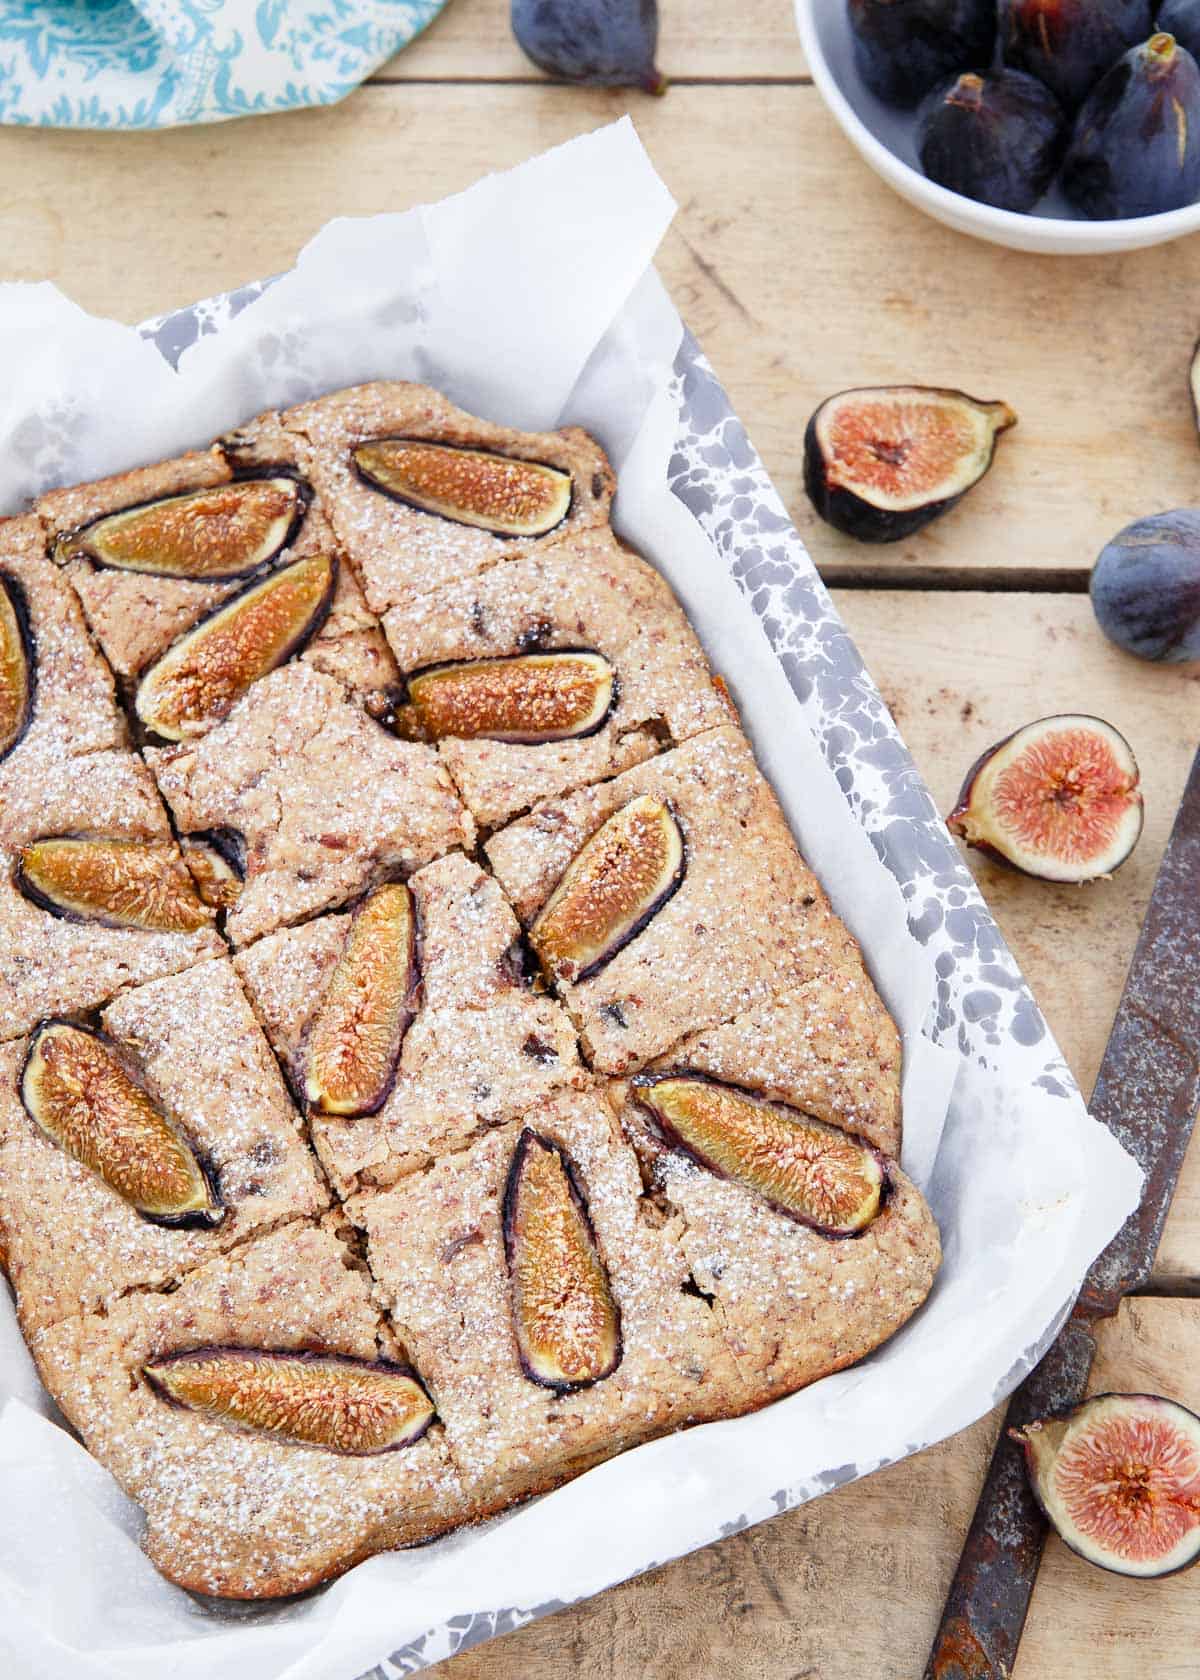 Gluten Free Ricotta Almond Fig Cake is the perfect summer breakfast or afternoon snack.